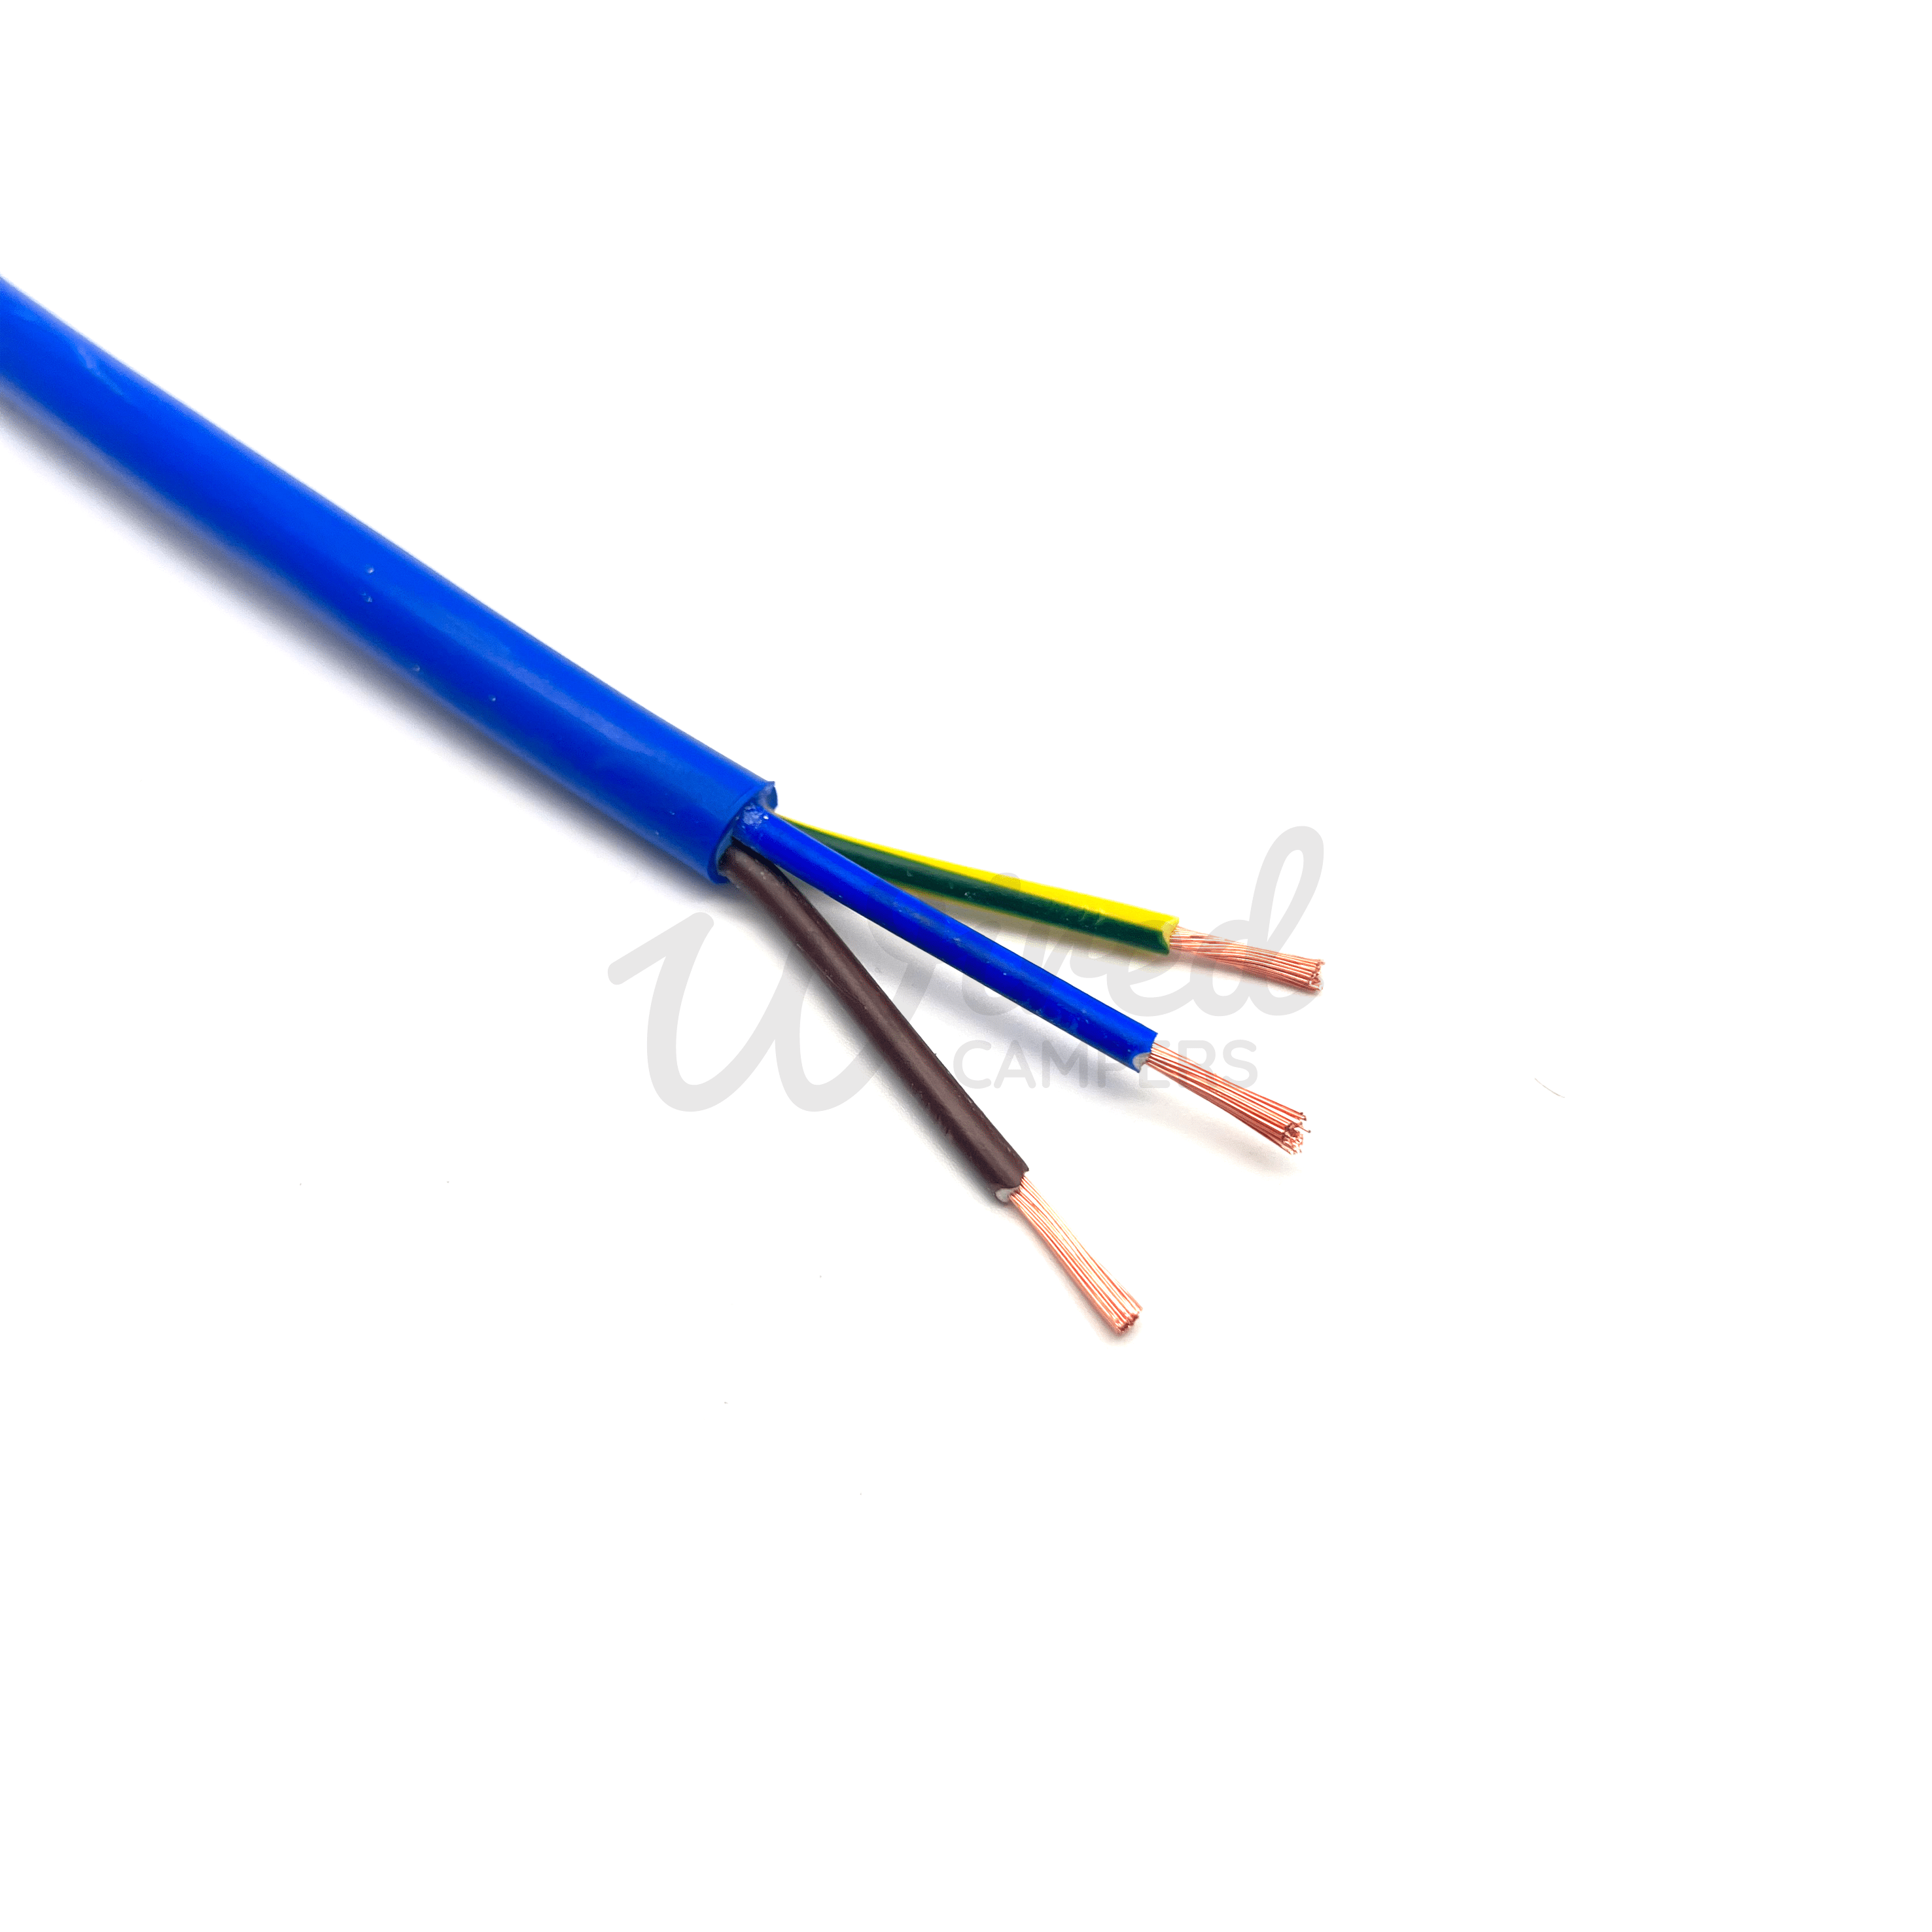 Wired Campers Limited 3 Core Blue Arctic Grade 2.5mm2 Flexible Round Cable 300/500V BS6004